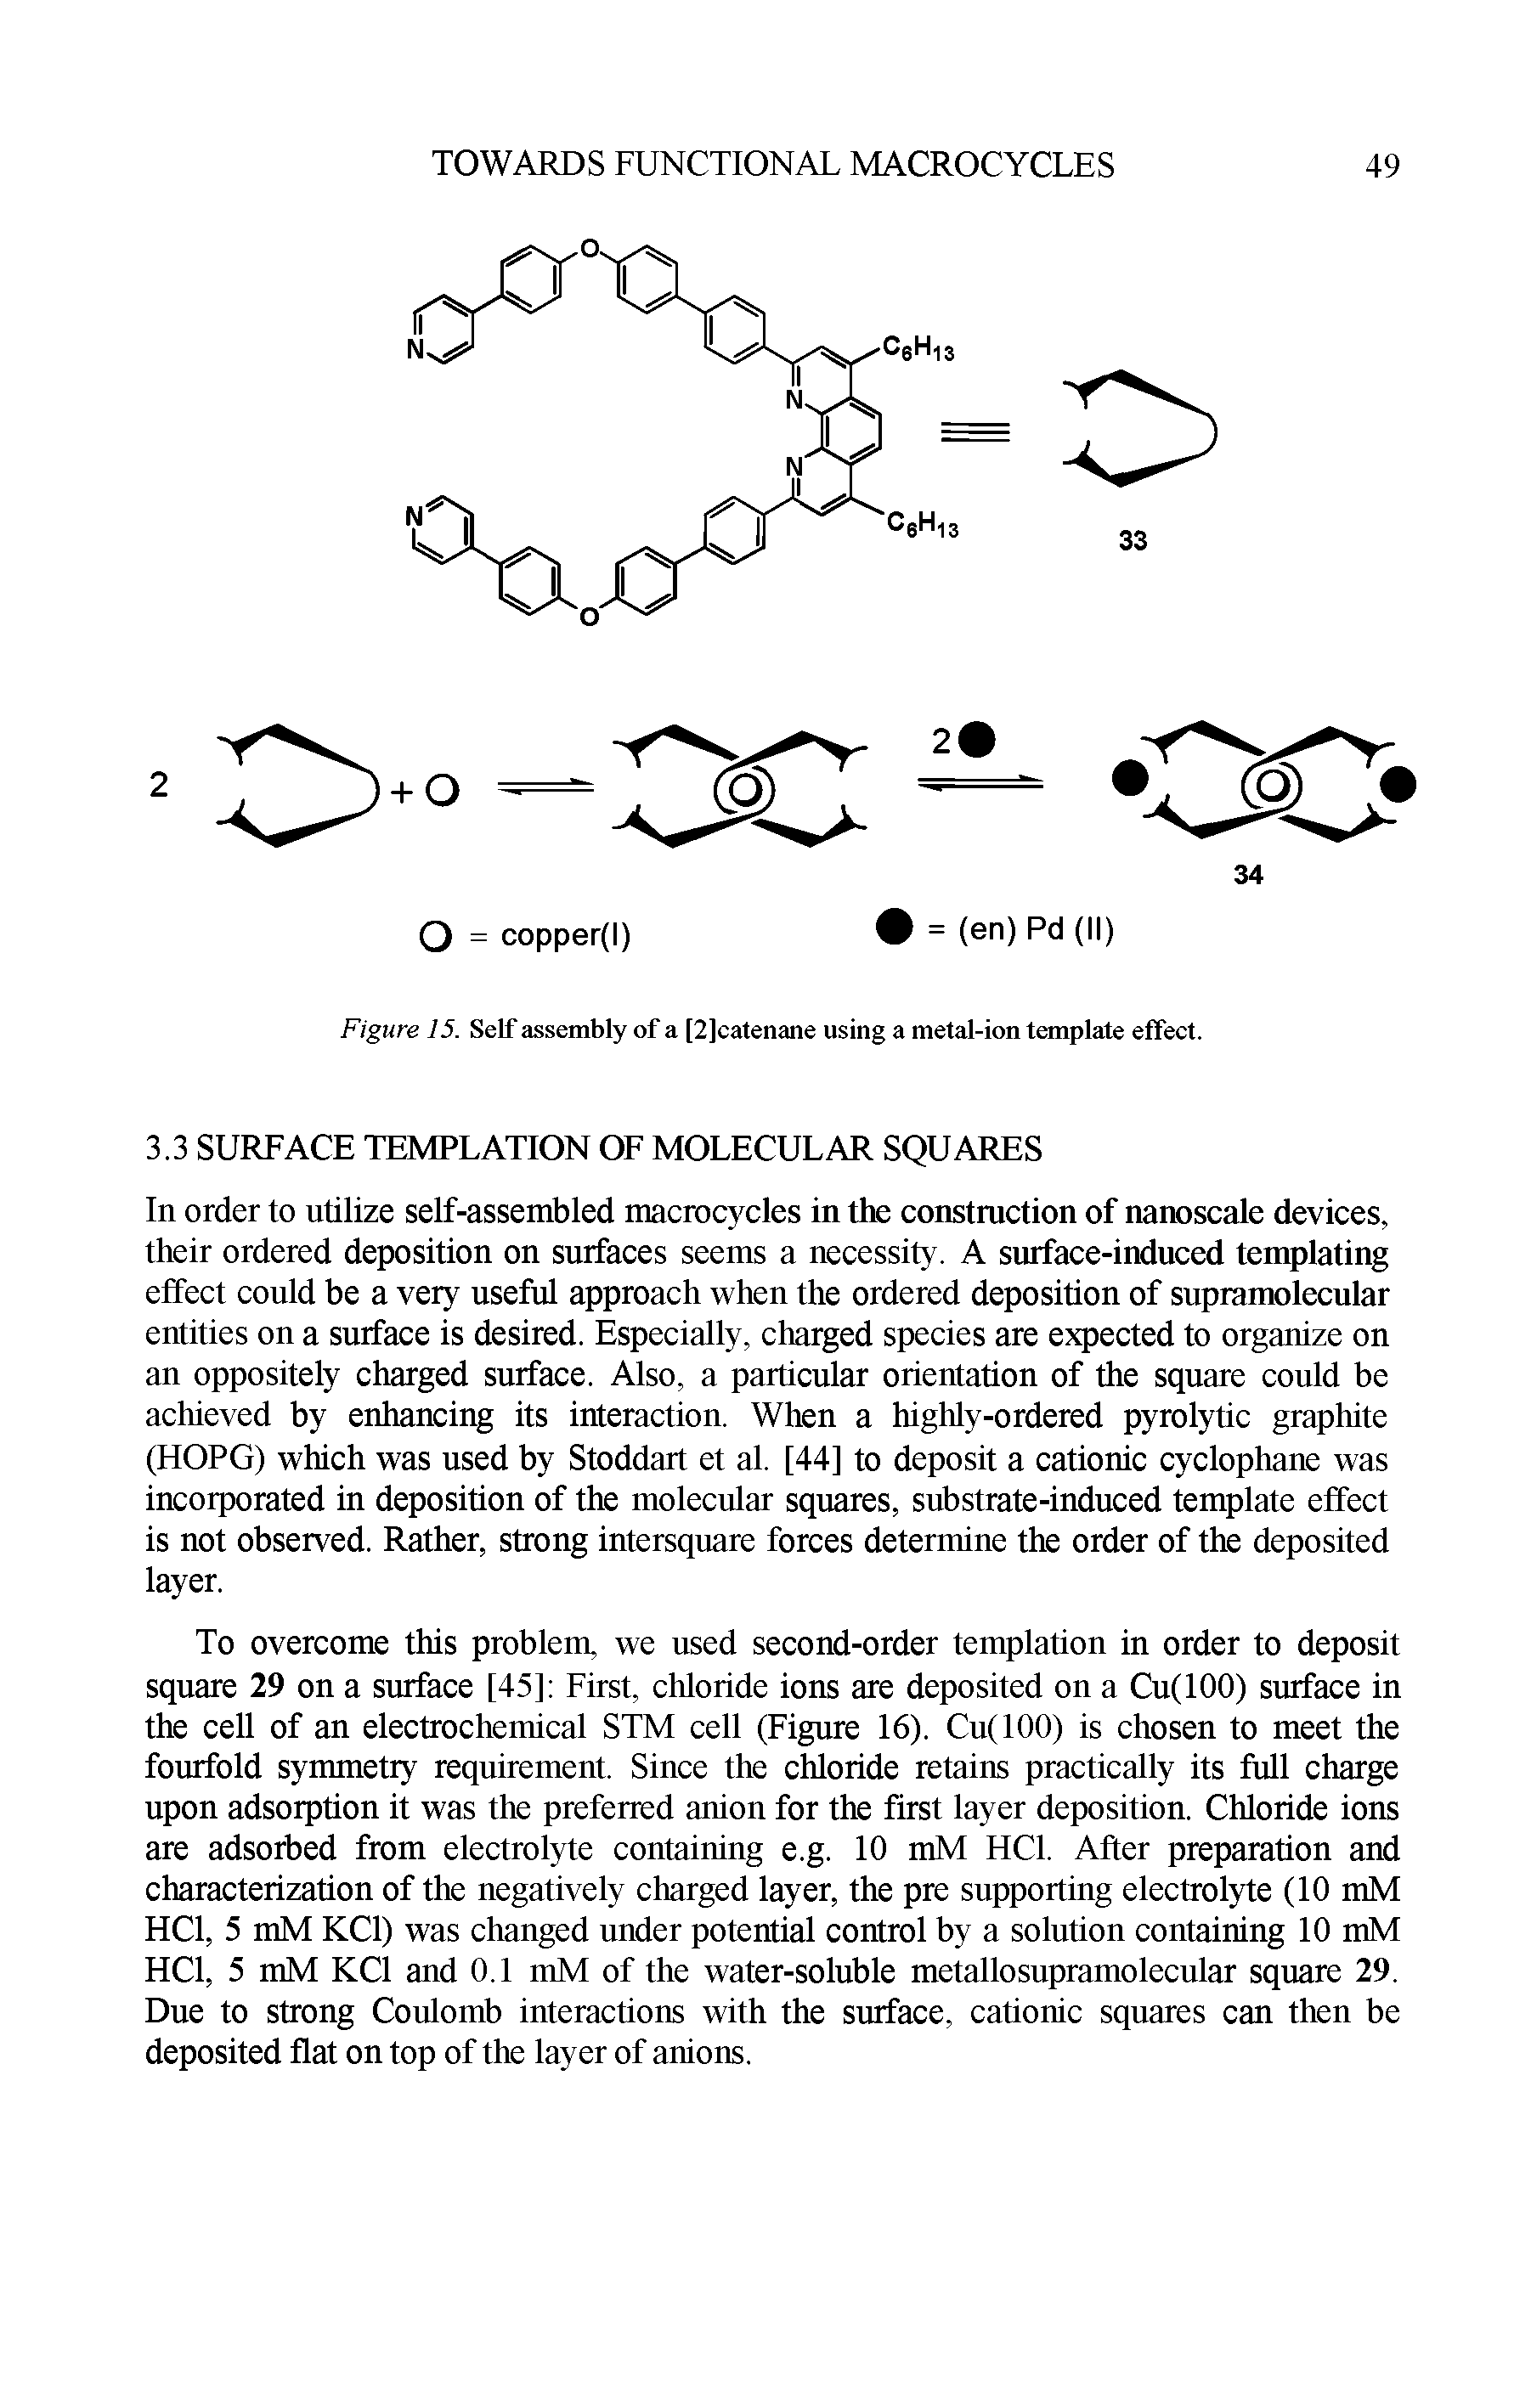 Figure 15. Self assembly of a [2]catenane using a metal-ion template effect.